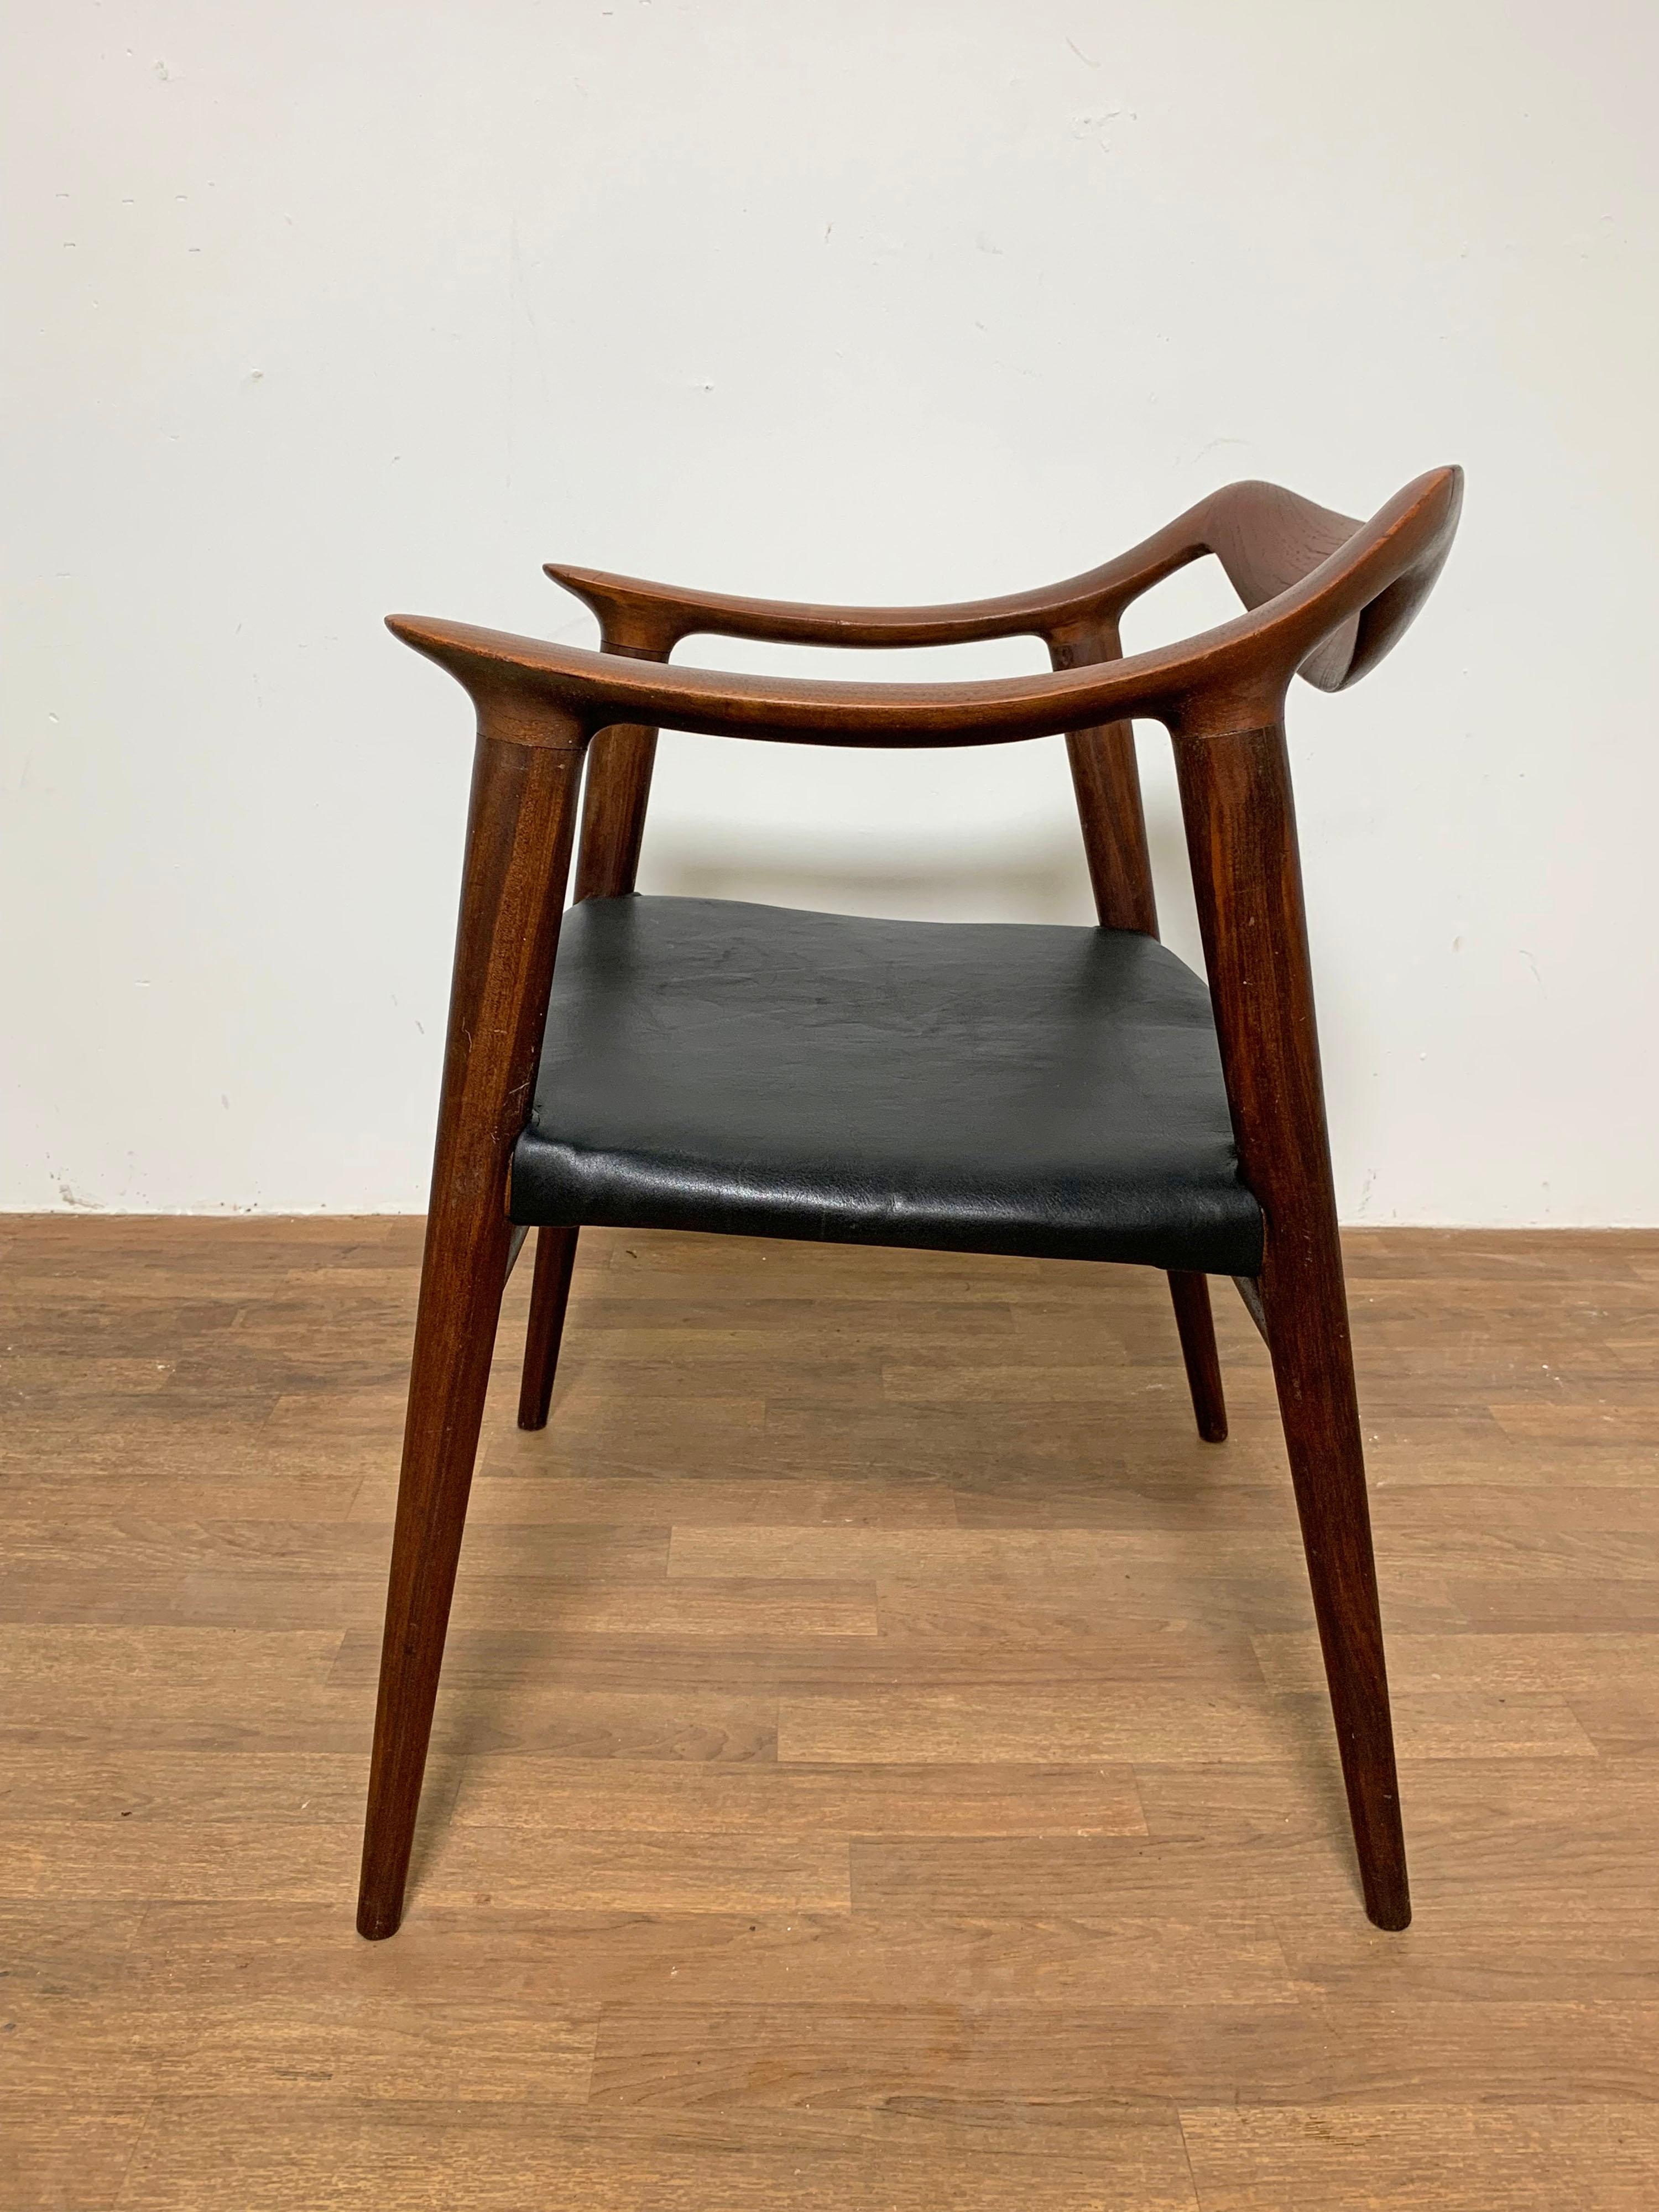 A 1950s teak armchair by the Norwegian designers Rolf Rastad and Adolf Relling upholstered in leather.